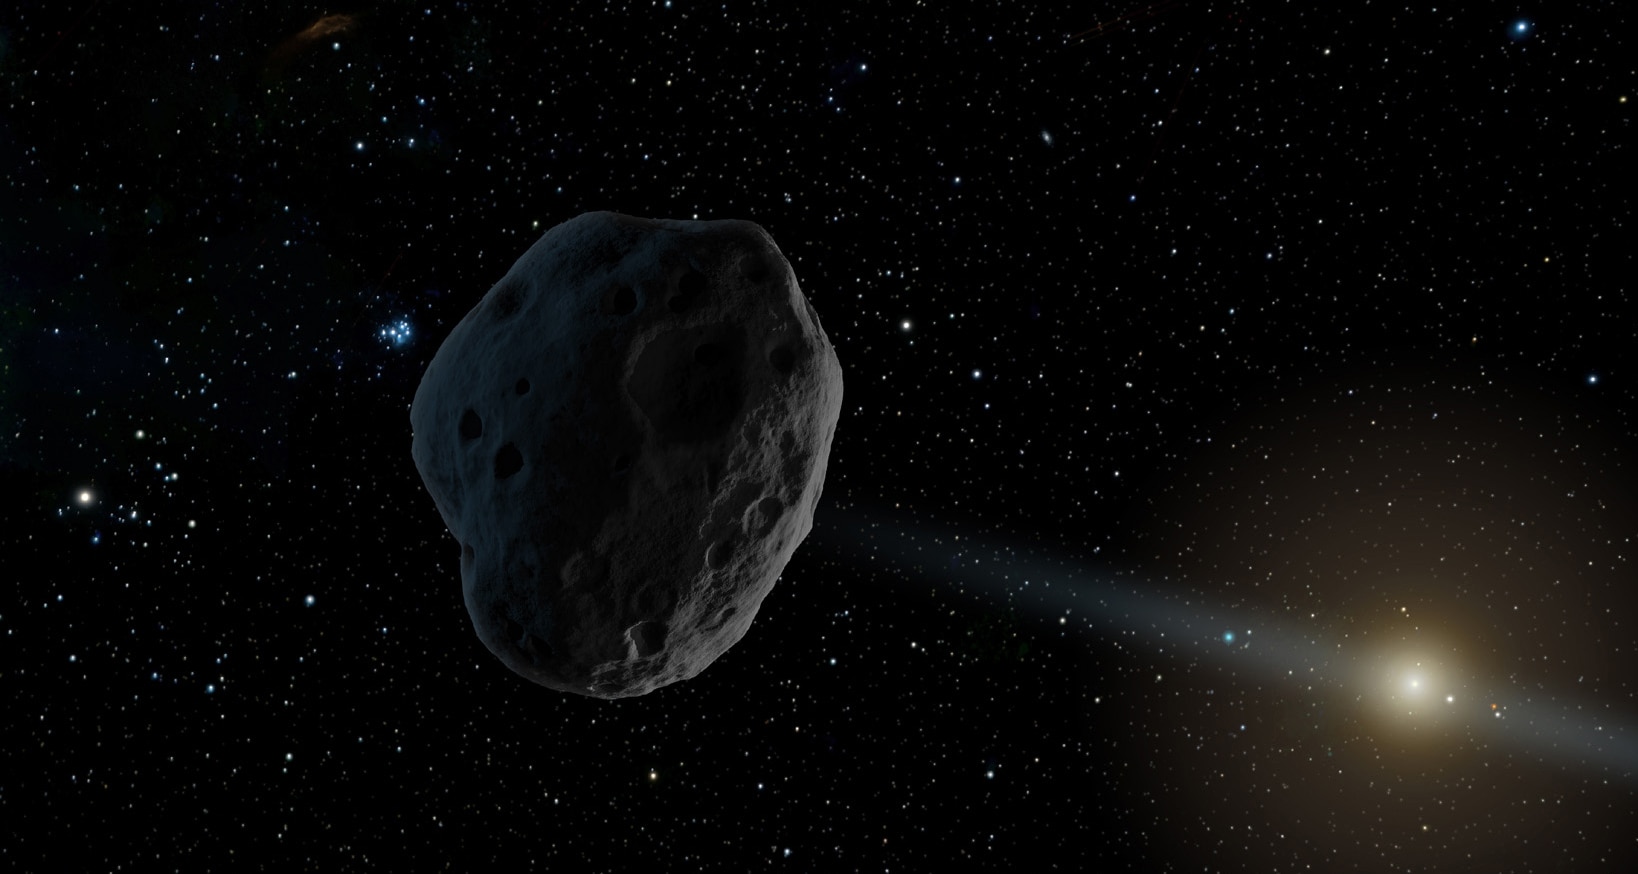 Second-ever Earth Trojan asteroid found!